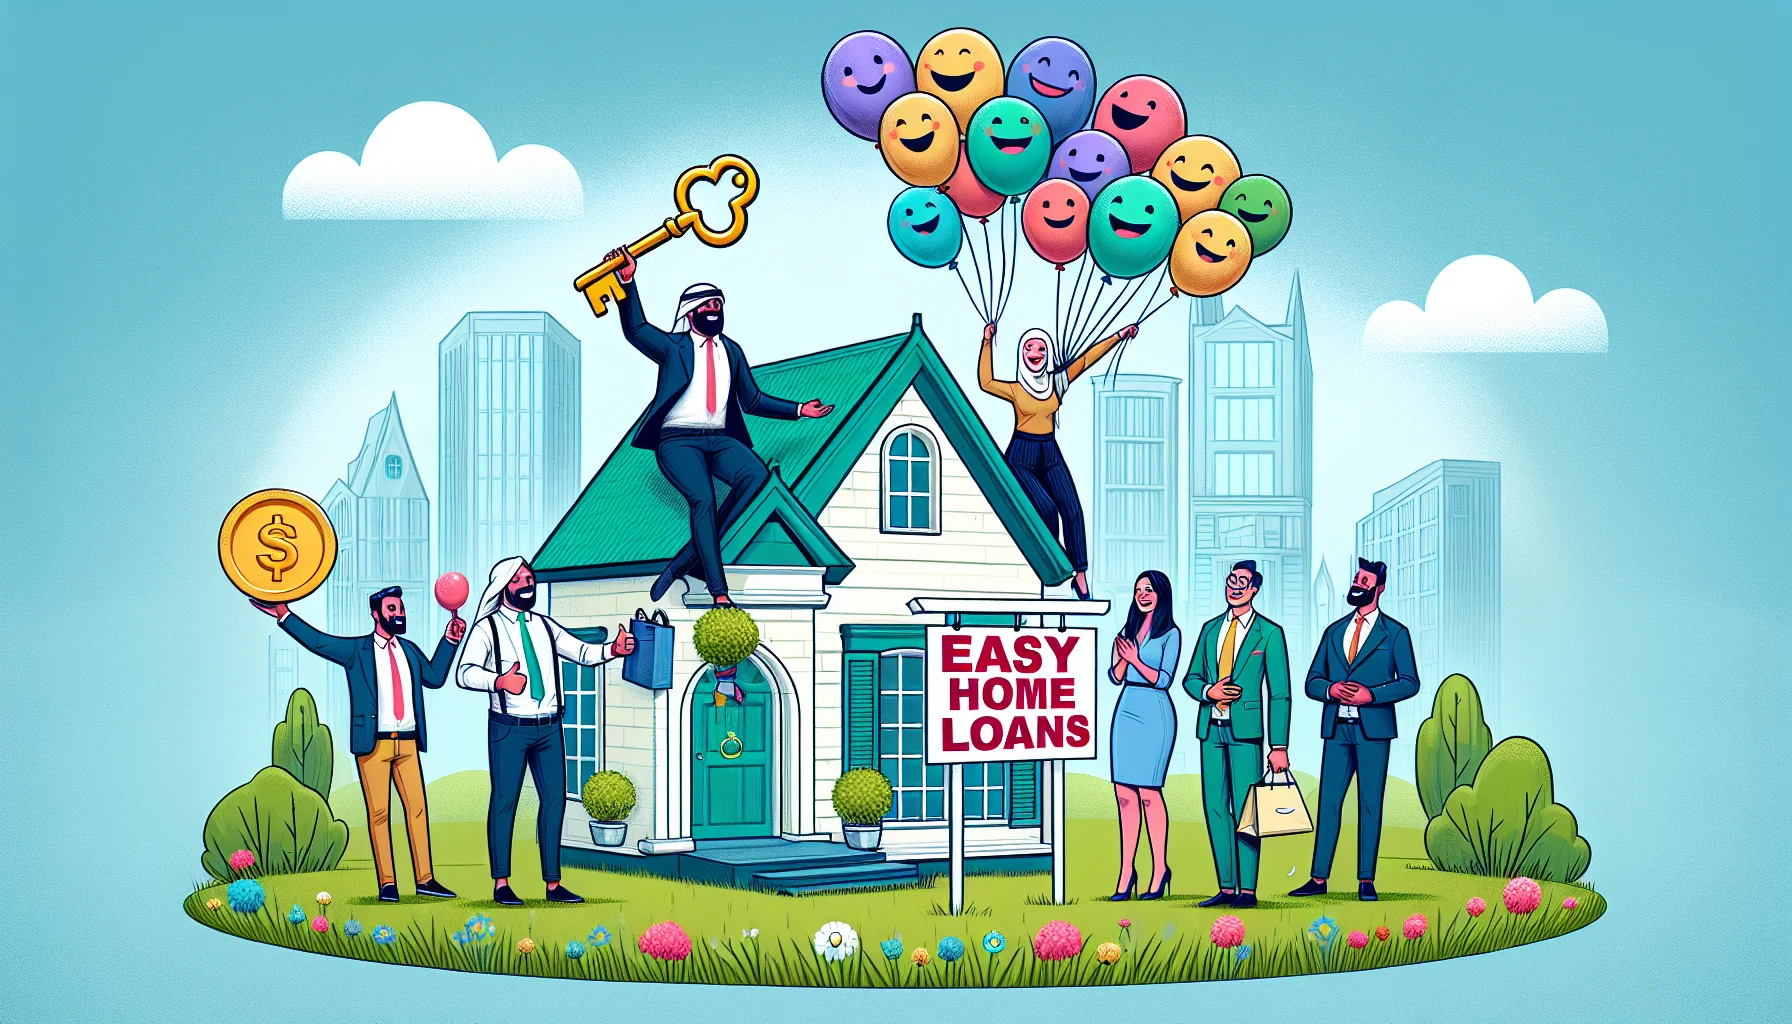 Craft an image containing a scenario related to easy home loans. In this scene, visualize a house with a 'sold' sign placed in its vibrant green garden. A diverse group of people, composed of a Middle-Eastern male real estate agent, a Caucasian woman and an Asian man holding colourful balloons, celebrating beating the odds in a competitive real estate market. Place a large key in the woman's hand, a symbol representing home ownership. To add humor, sketch a happier than usual bank building in the distant background, radiating joy through cartoonish features like wide grinning faces on its windows.